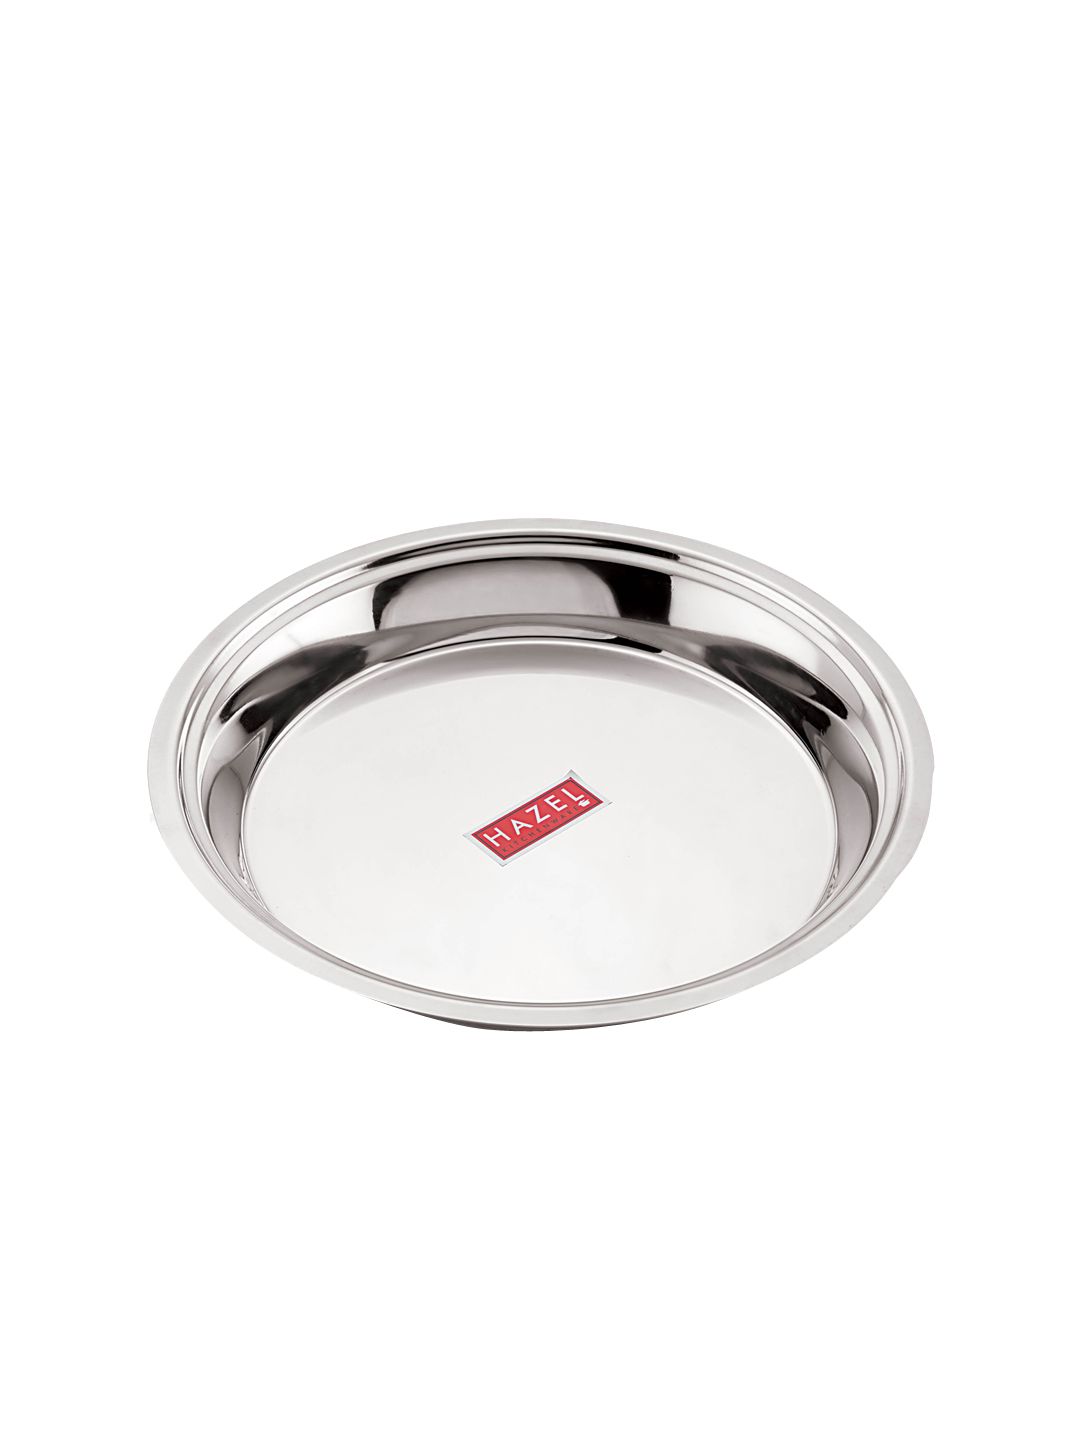 HAZEL Silver-Toned Stainless Steel Mixing Bowl Price in India